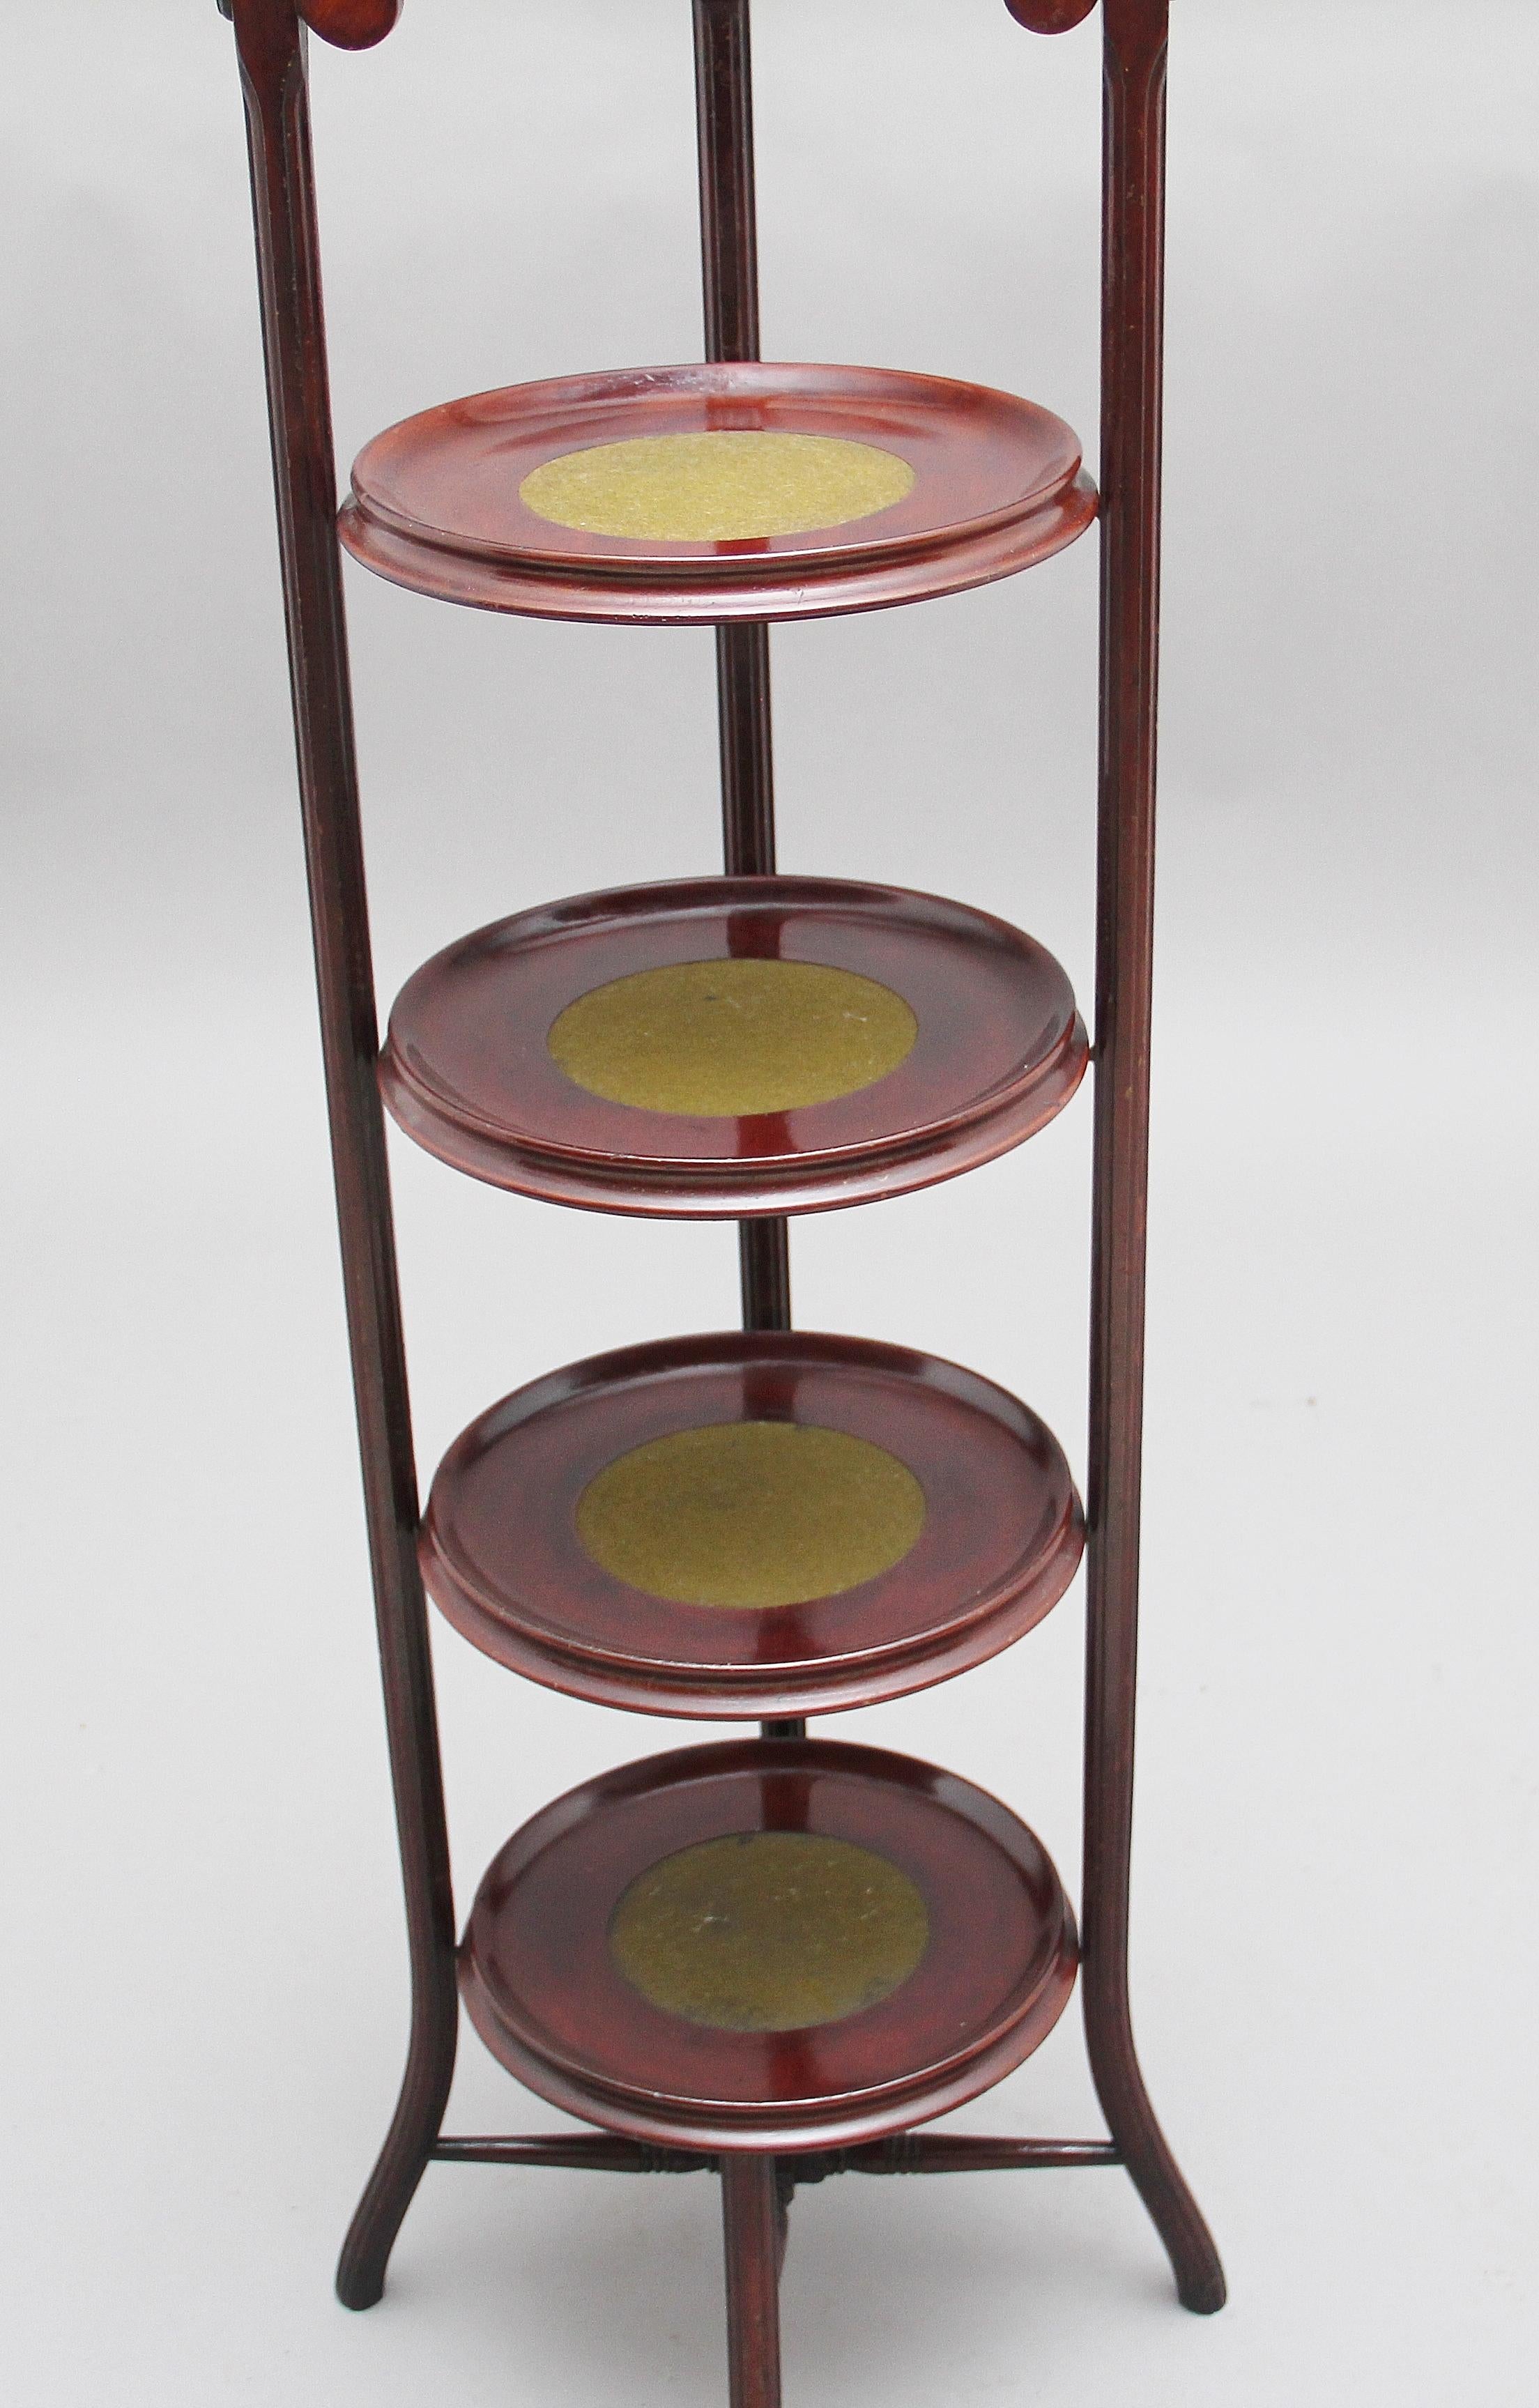 A decorative early 20th century mahogany four-tier cake stand, the four dish shaped tiers having green baize inserts, these are supported on a turned and fluted frame with outswept legs, the top of the cake stand is decorated with a turned finial,